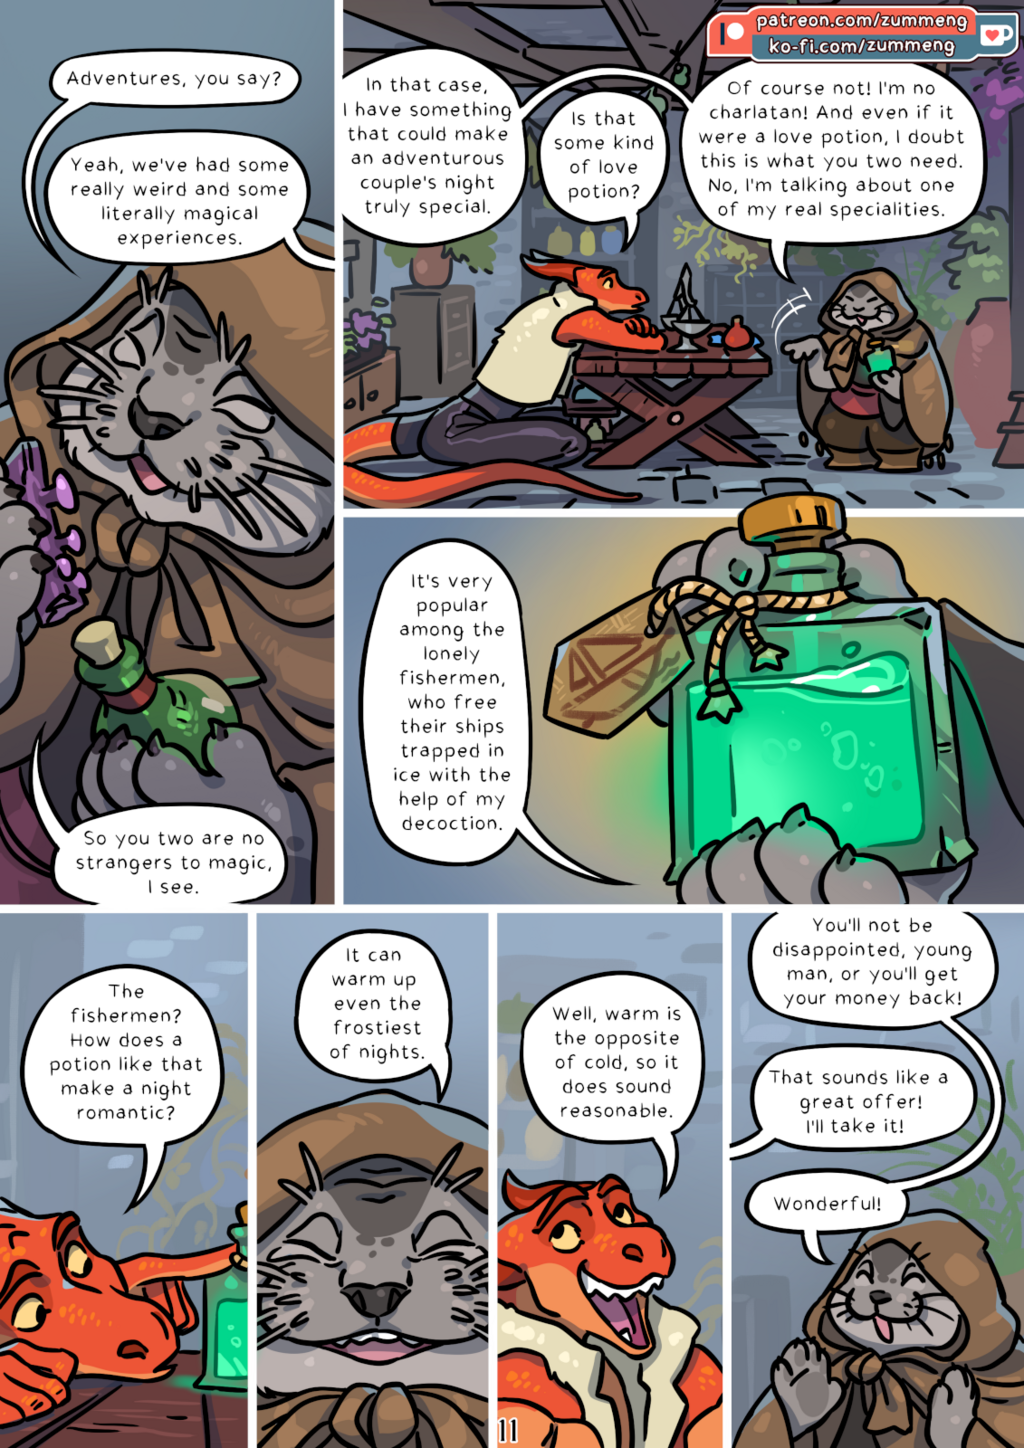 Wishes 3 pg. 11.